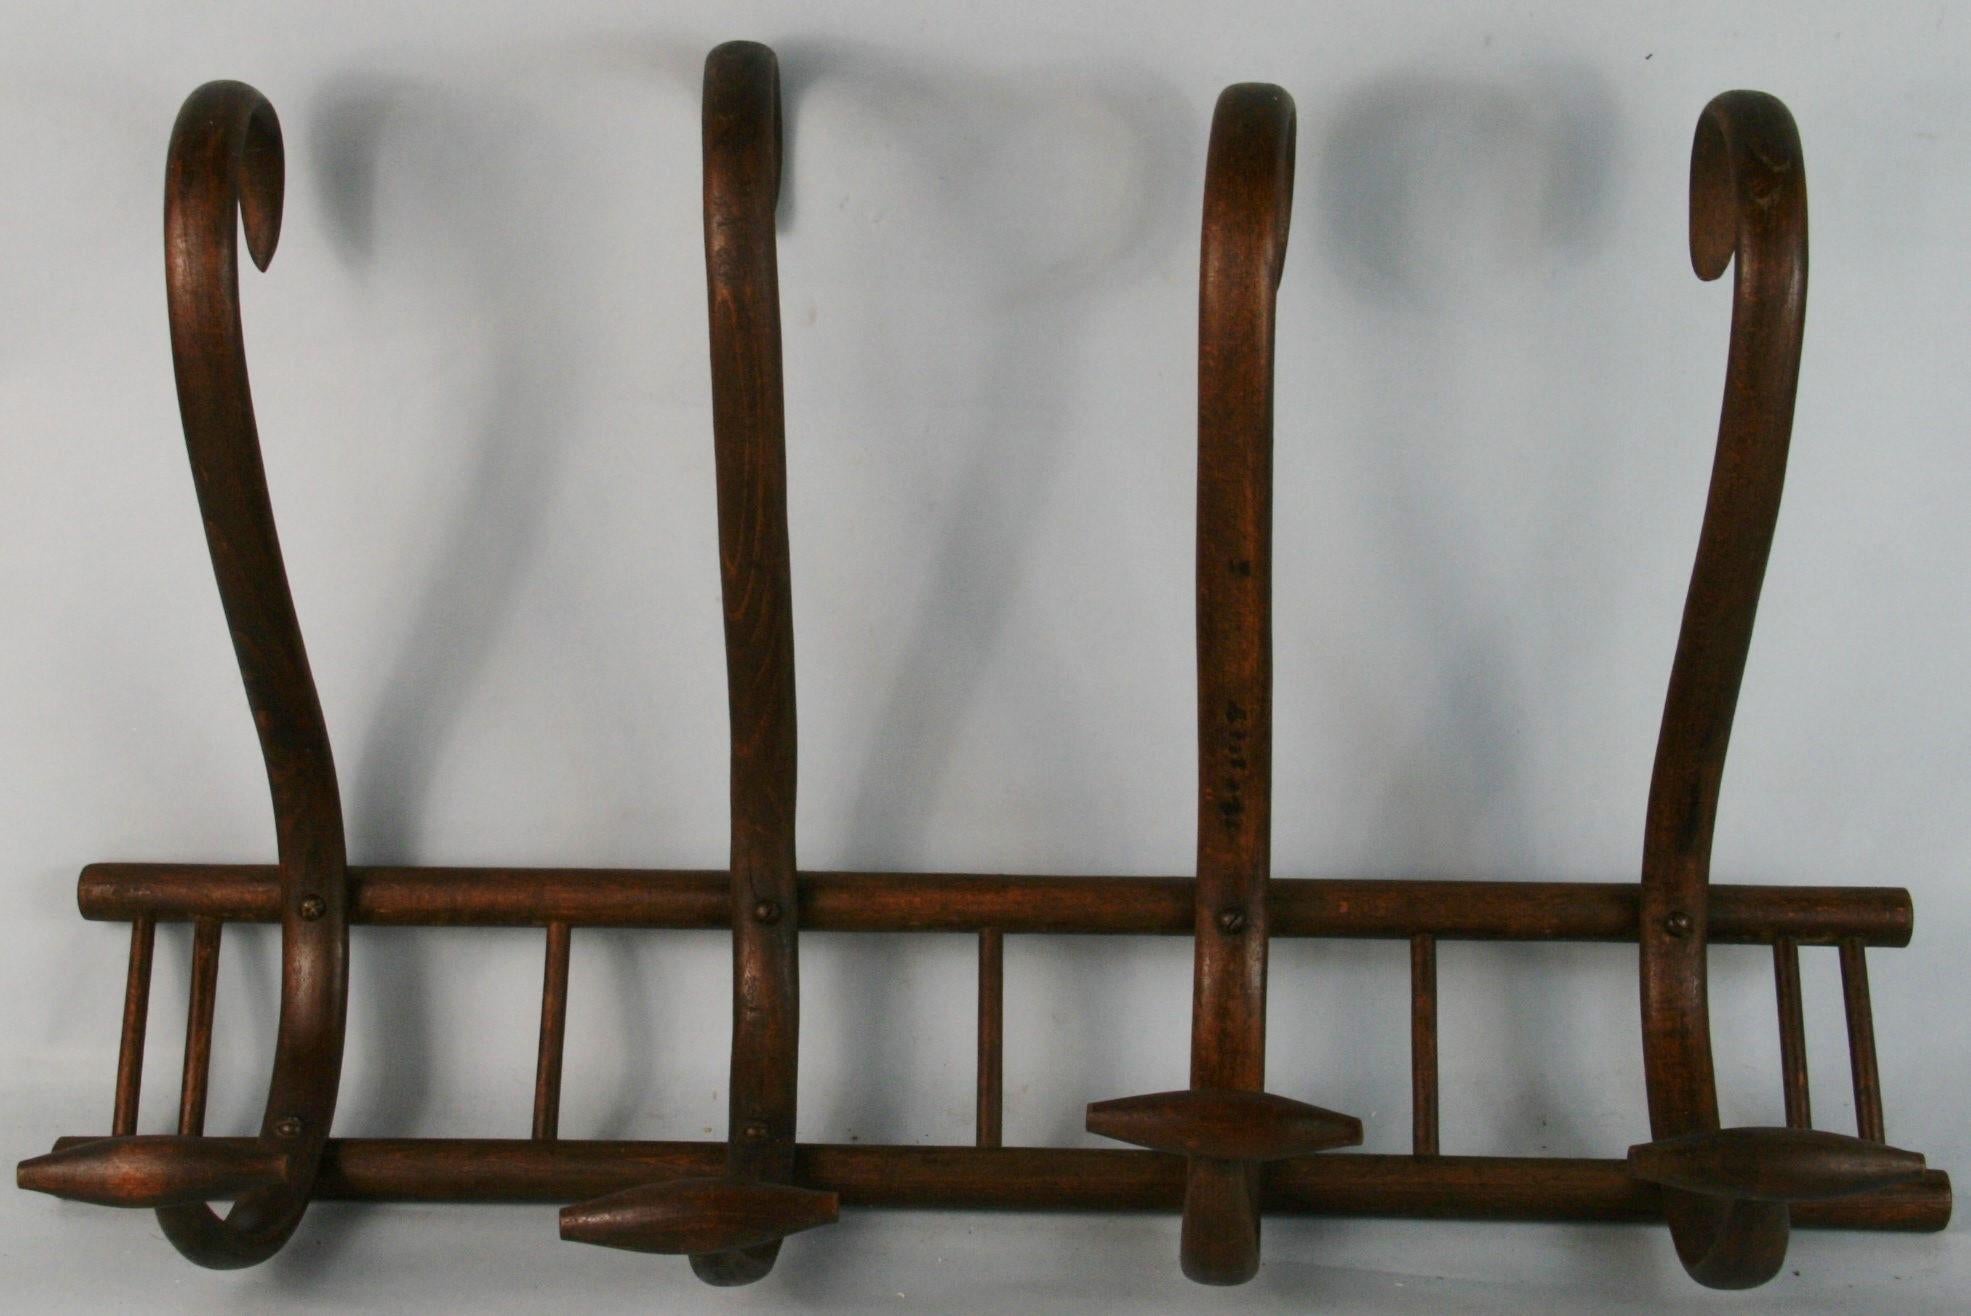 3-667 wall coat rack made in bent wood by Thornet in early 1920's
Elegant bentwood work typical of Thornet production.